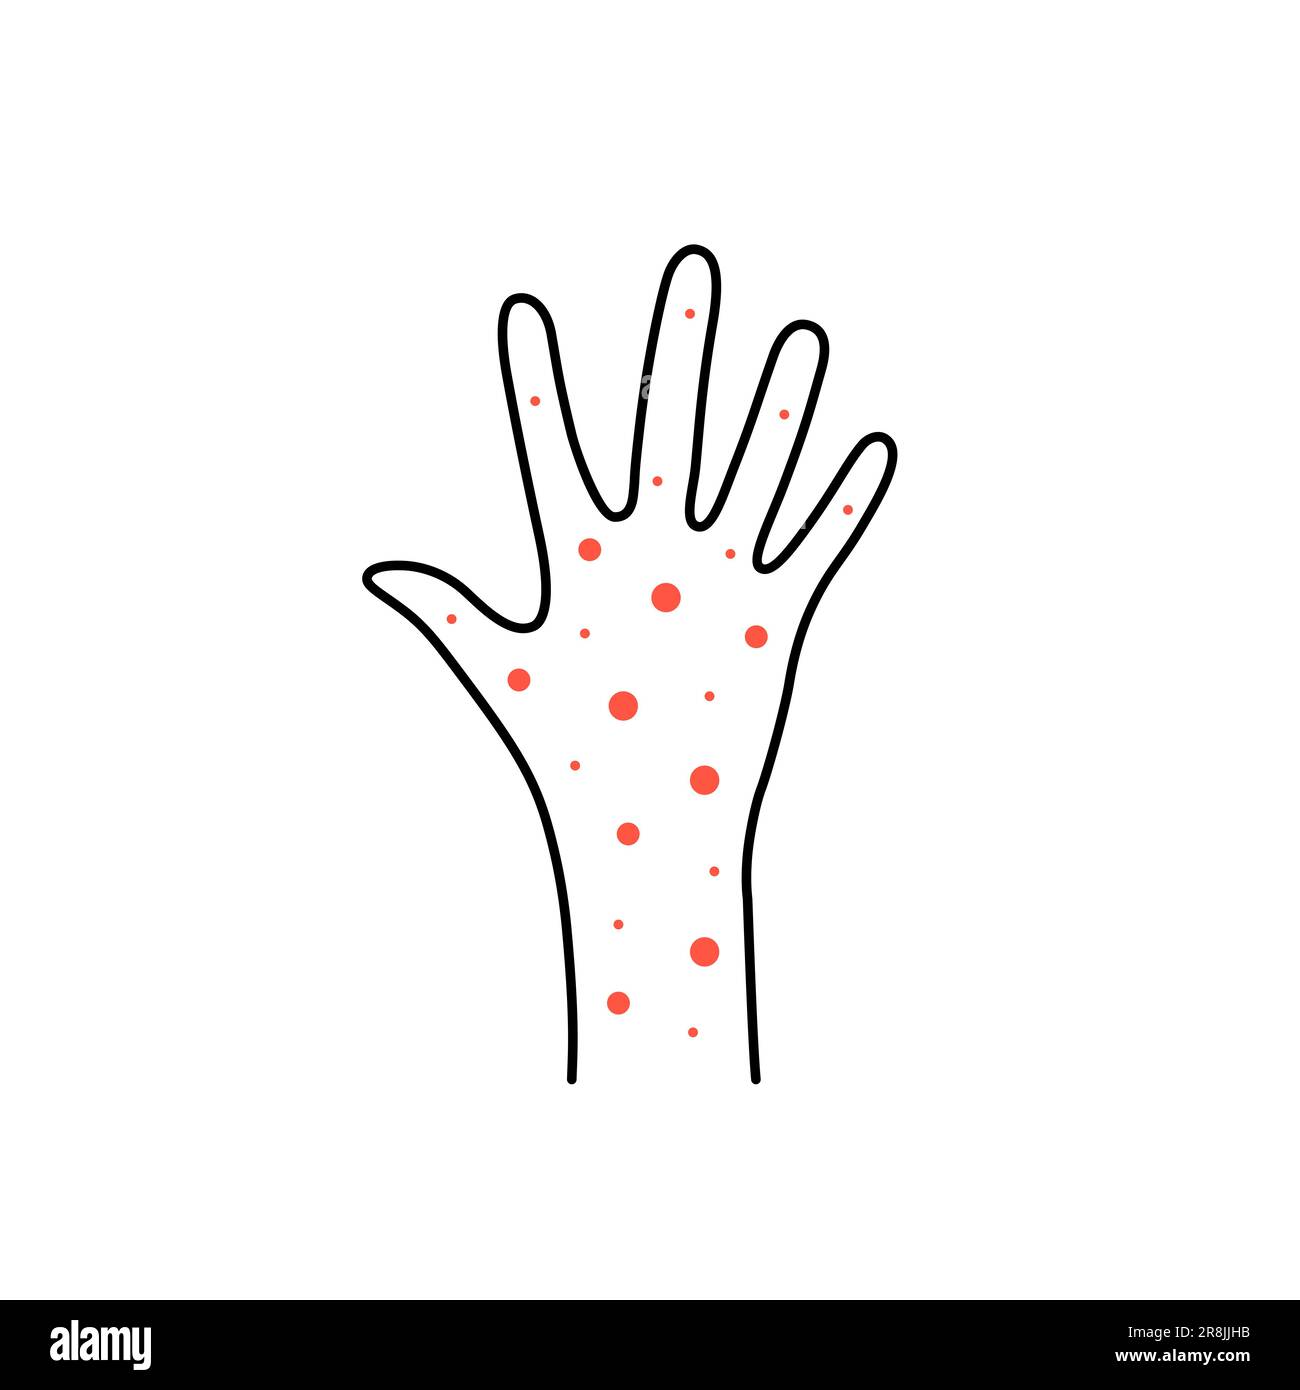 linear hand with rash or psoriasis Stock Vector